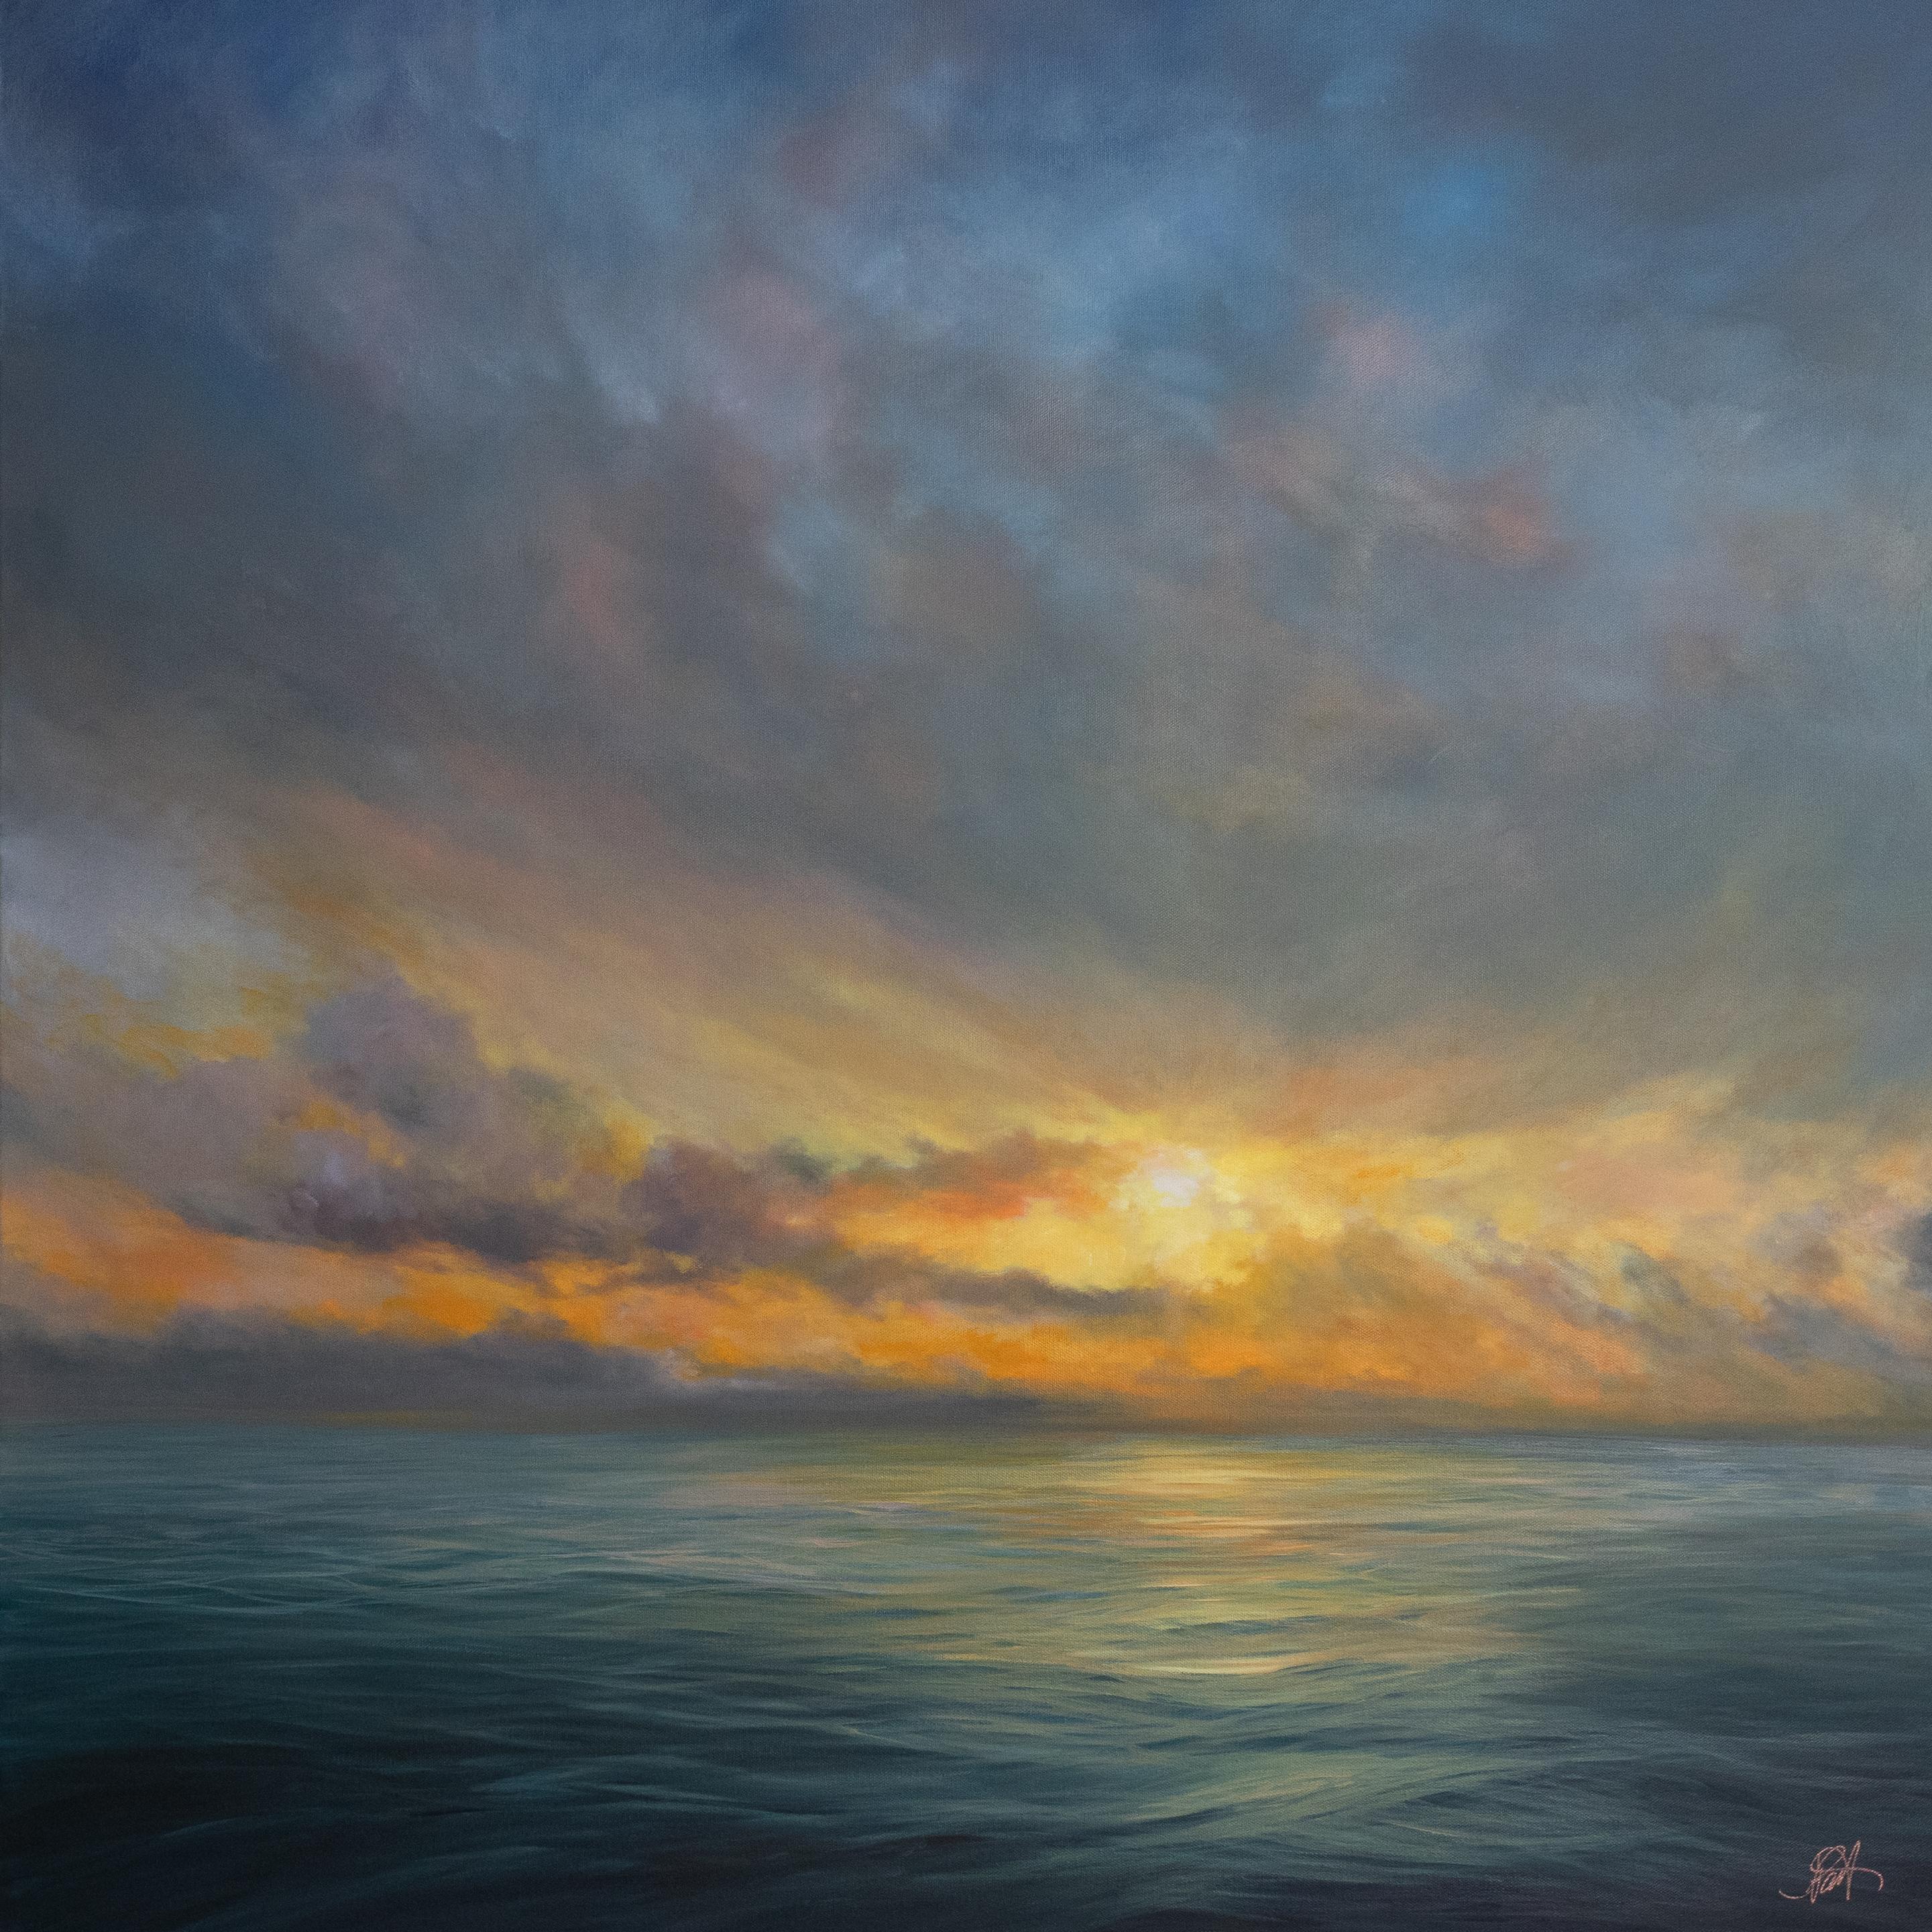 Enchanted-original realism modern seascape ocean oil painting-contemporary Art - Painting by Joanne Parent